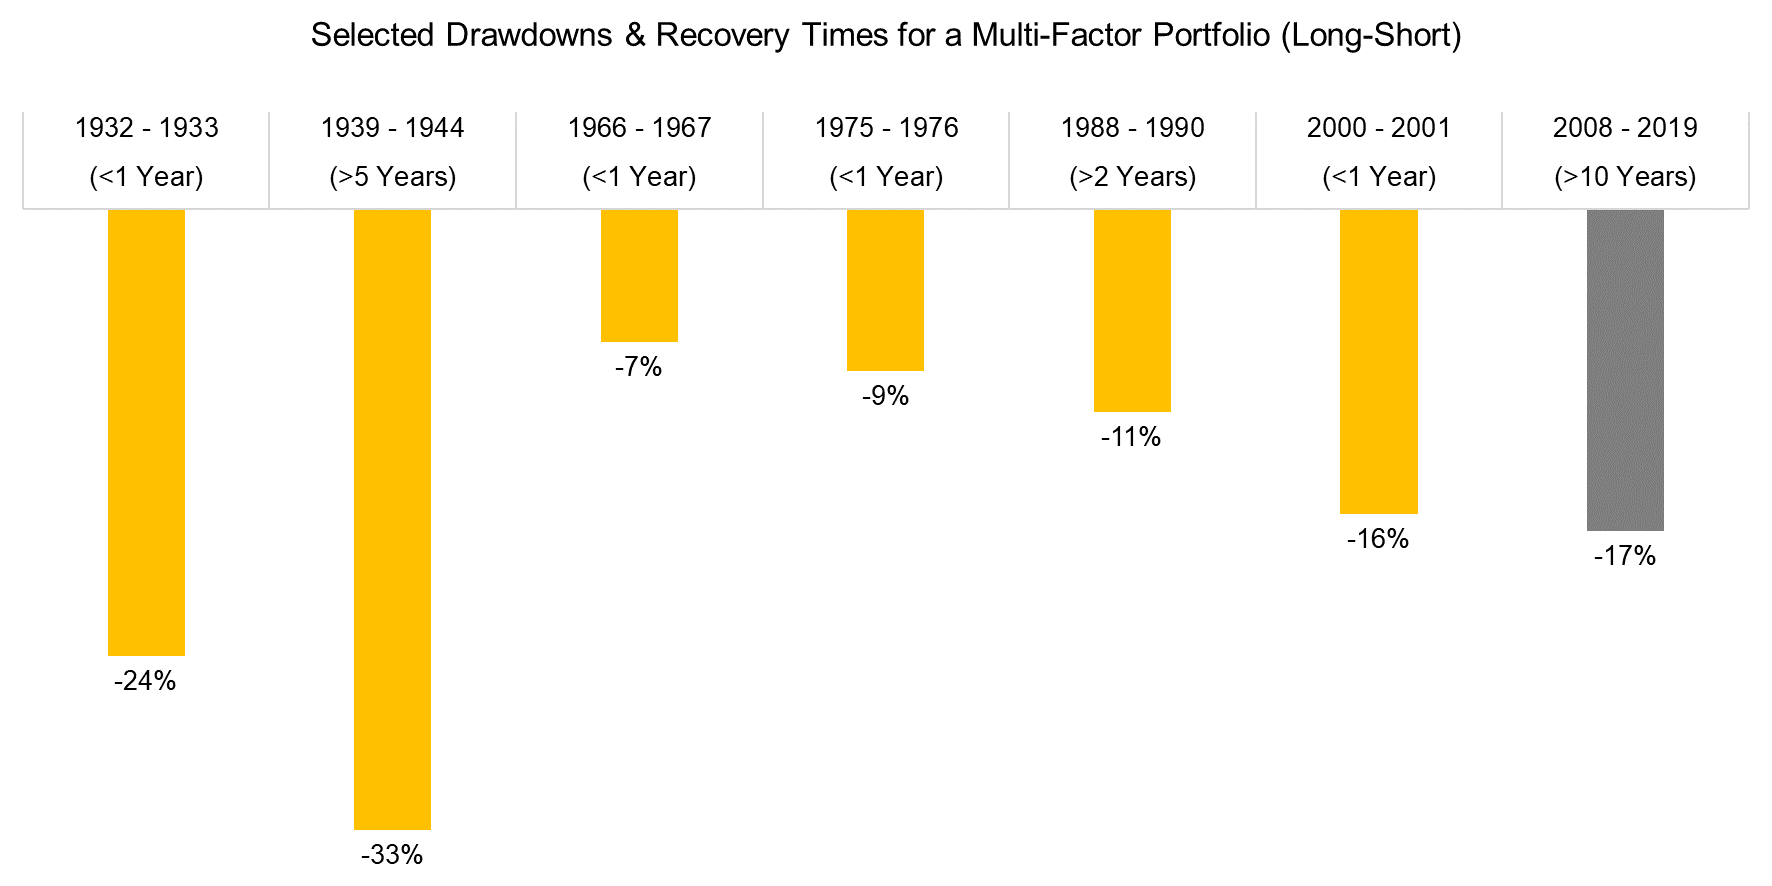 Selected Drawdowns & Recovery Times for a Multi-Factor Portfolio (Long-Short